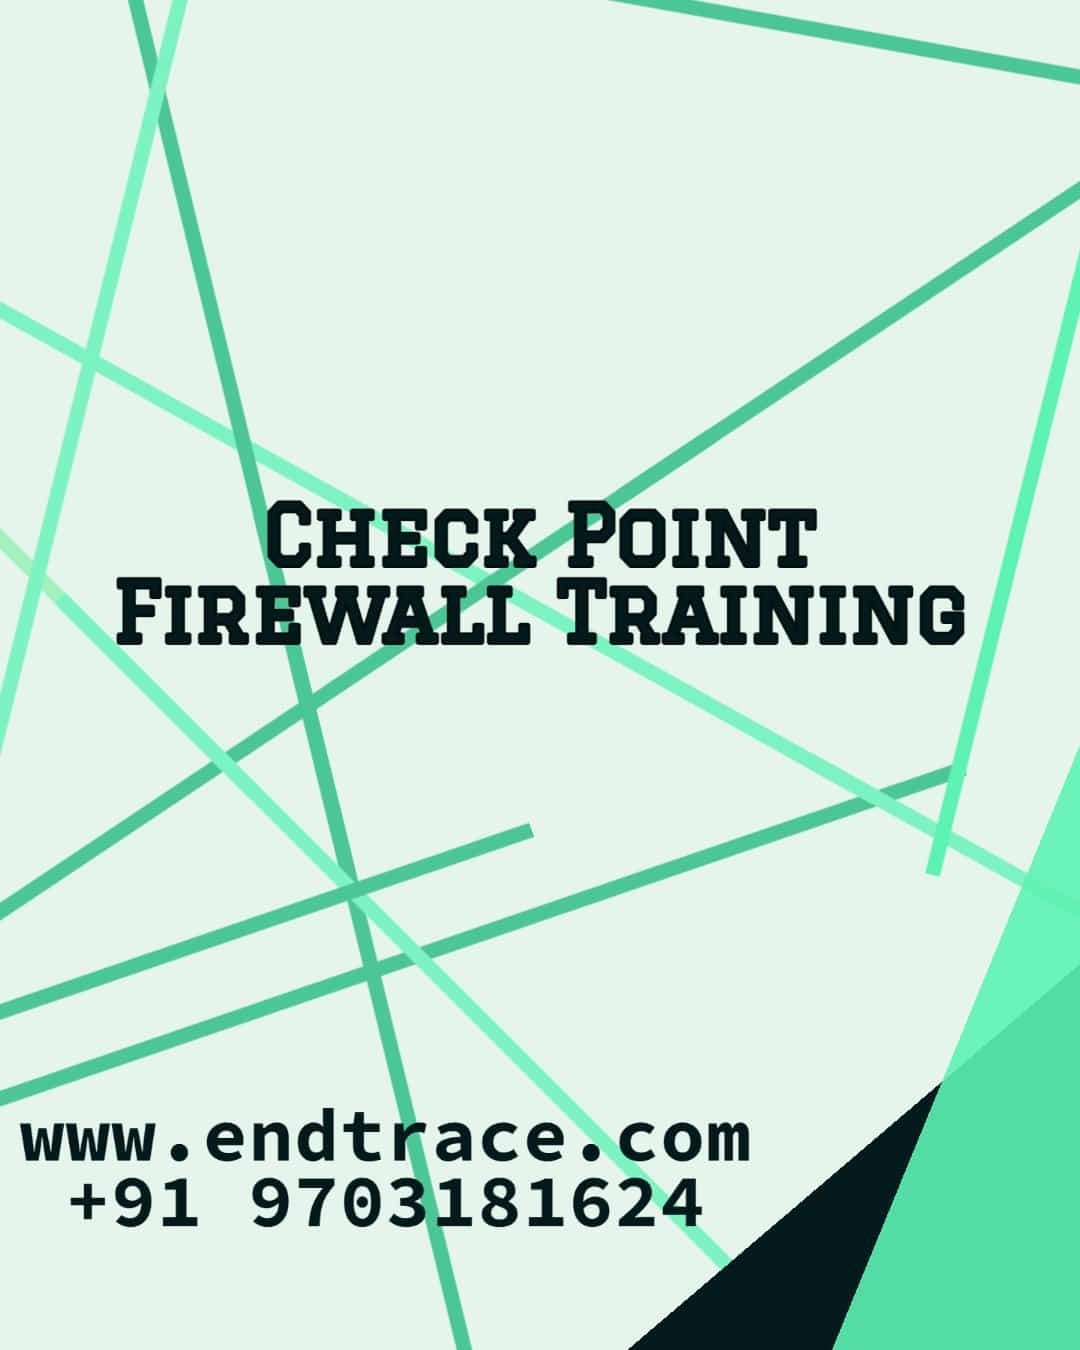 Best Check Point Firewall Training - endtrace